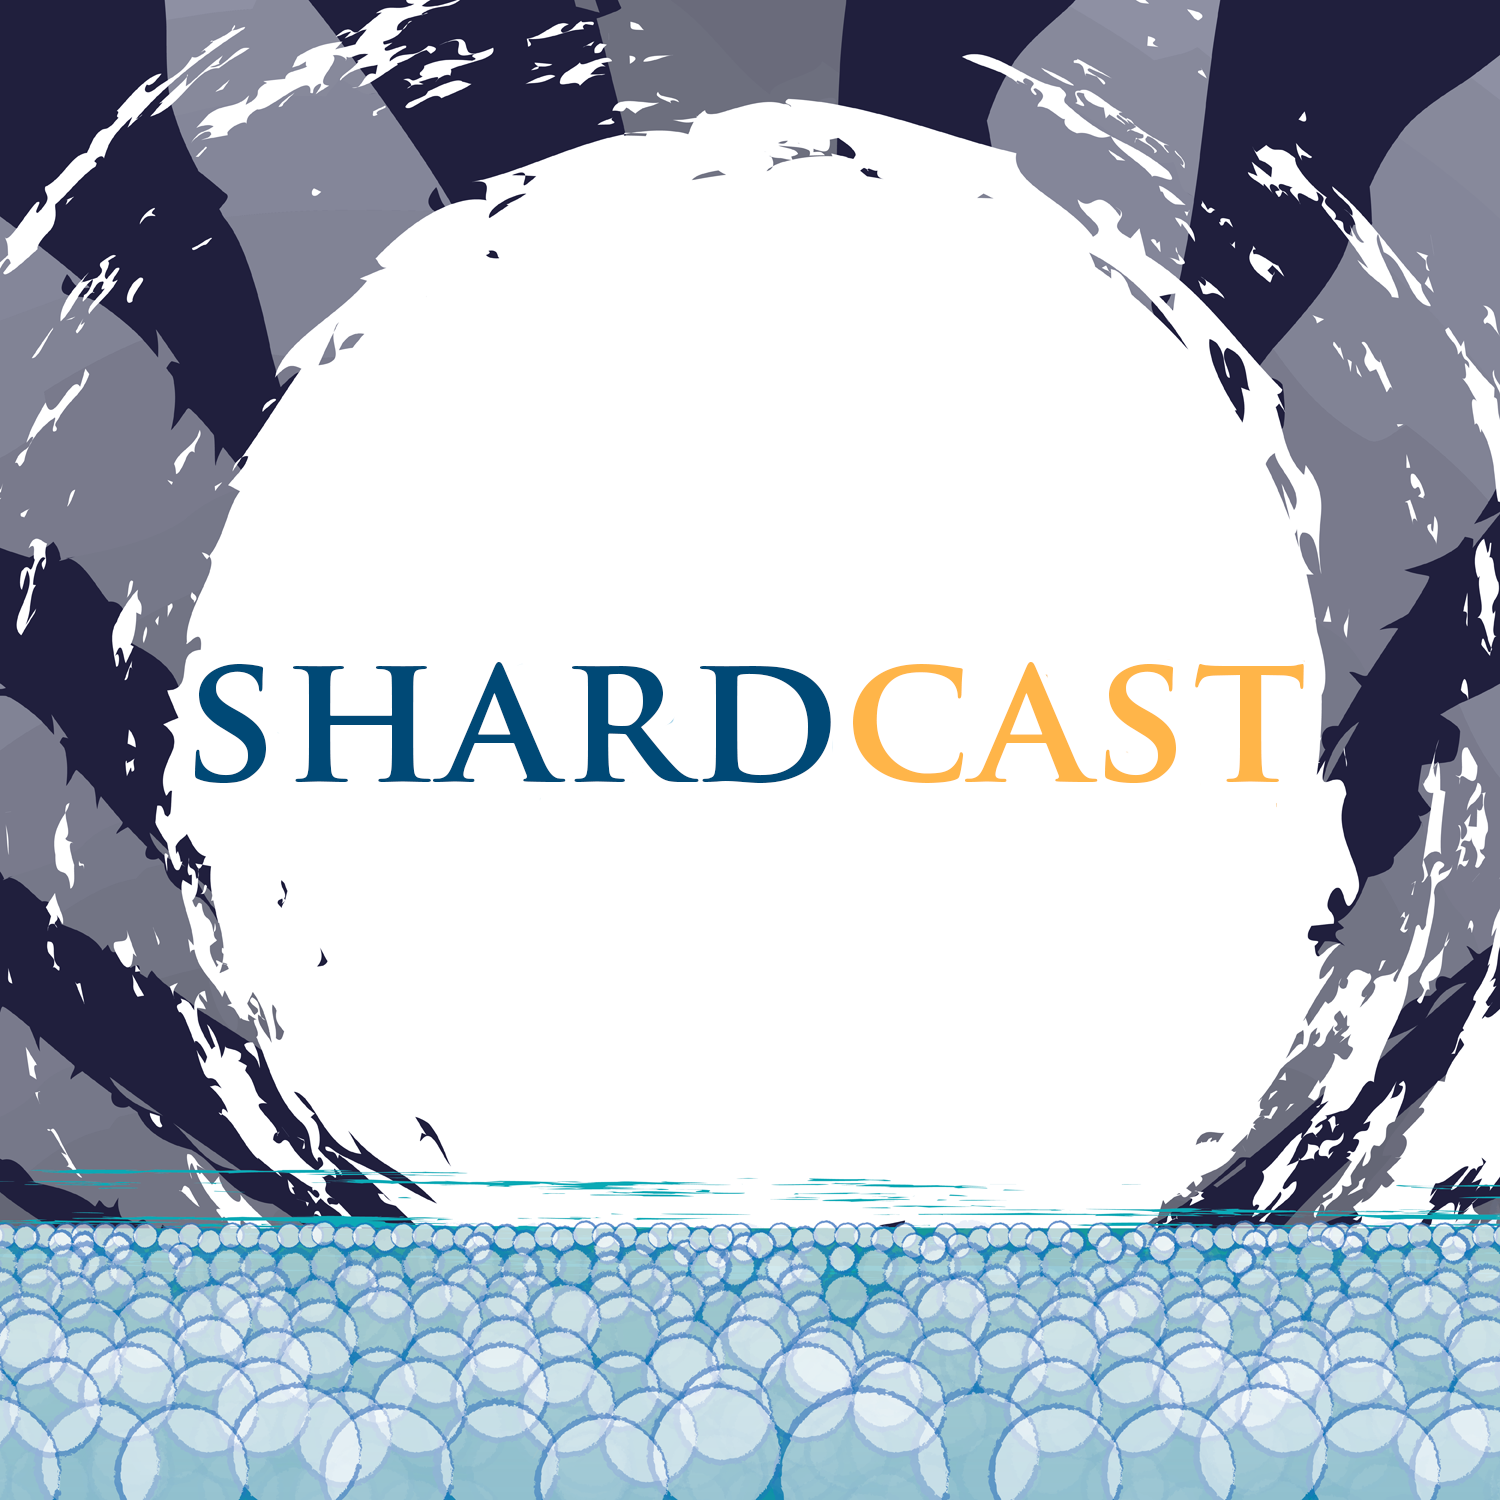 More information about "Shardcast: Stoneshaping & Ancient Dawnsingers"